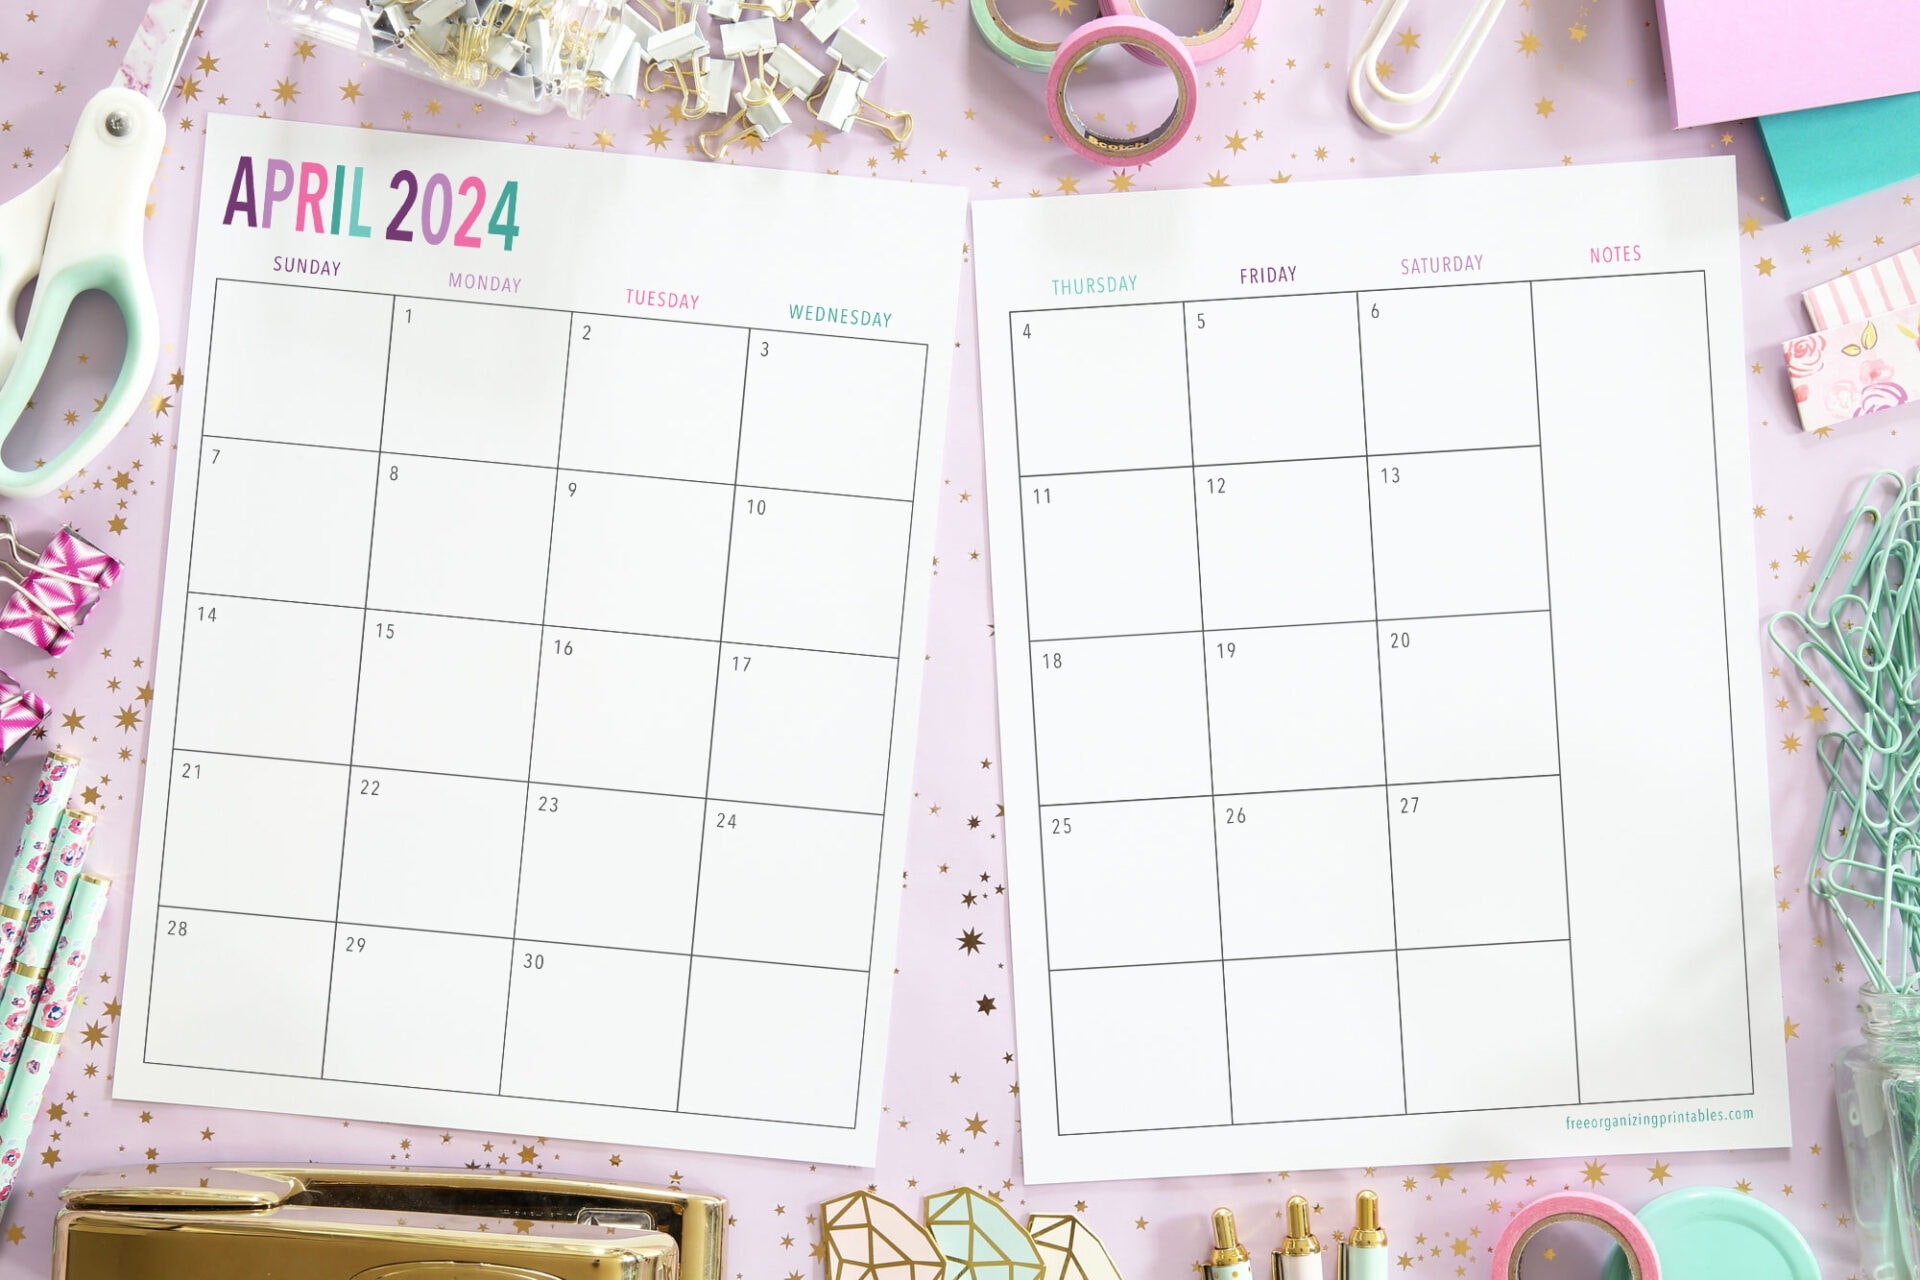 Free Printable 2 Page Blank Monthly Calendar 2024 pertaining to Free Printable Calendar 20242